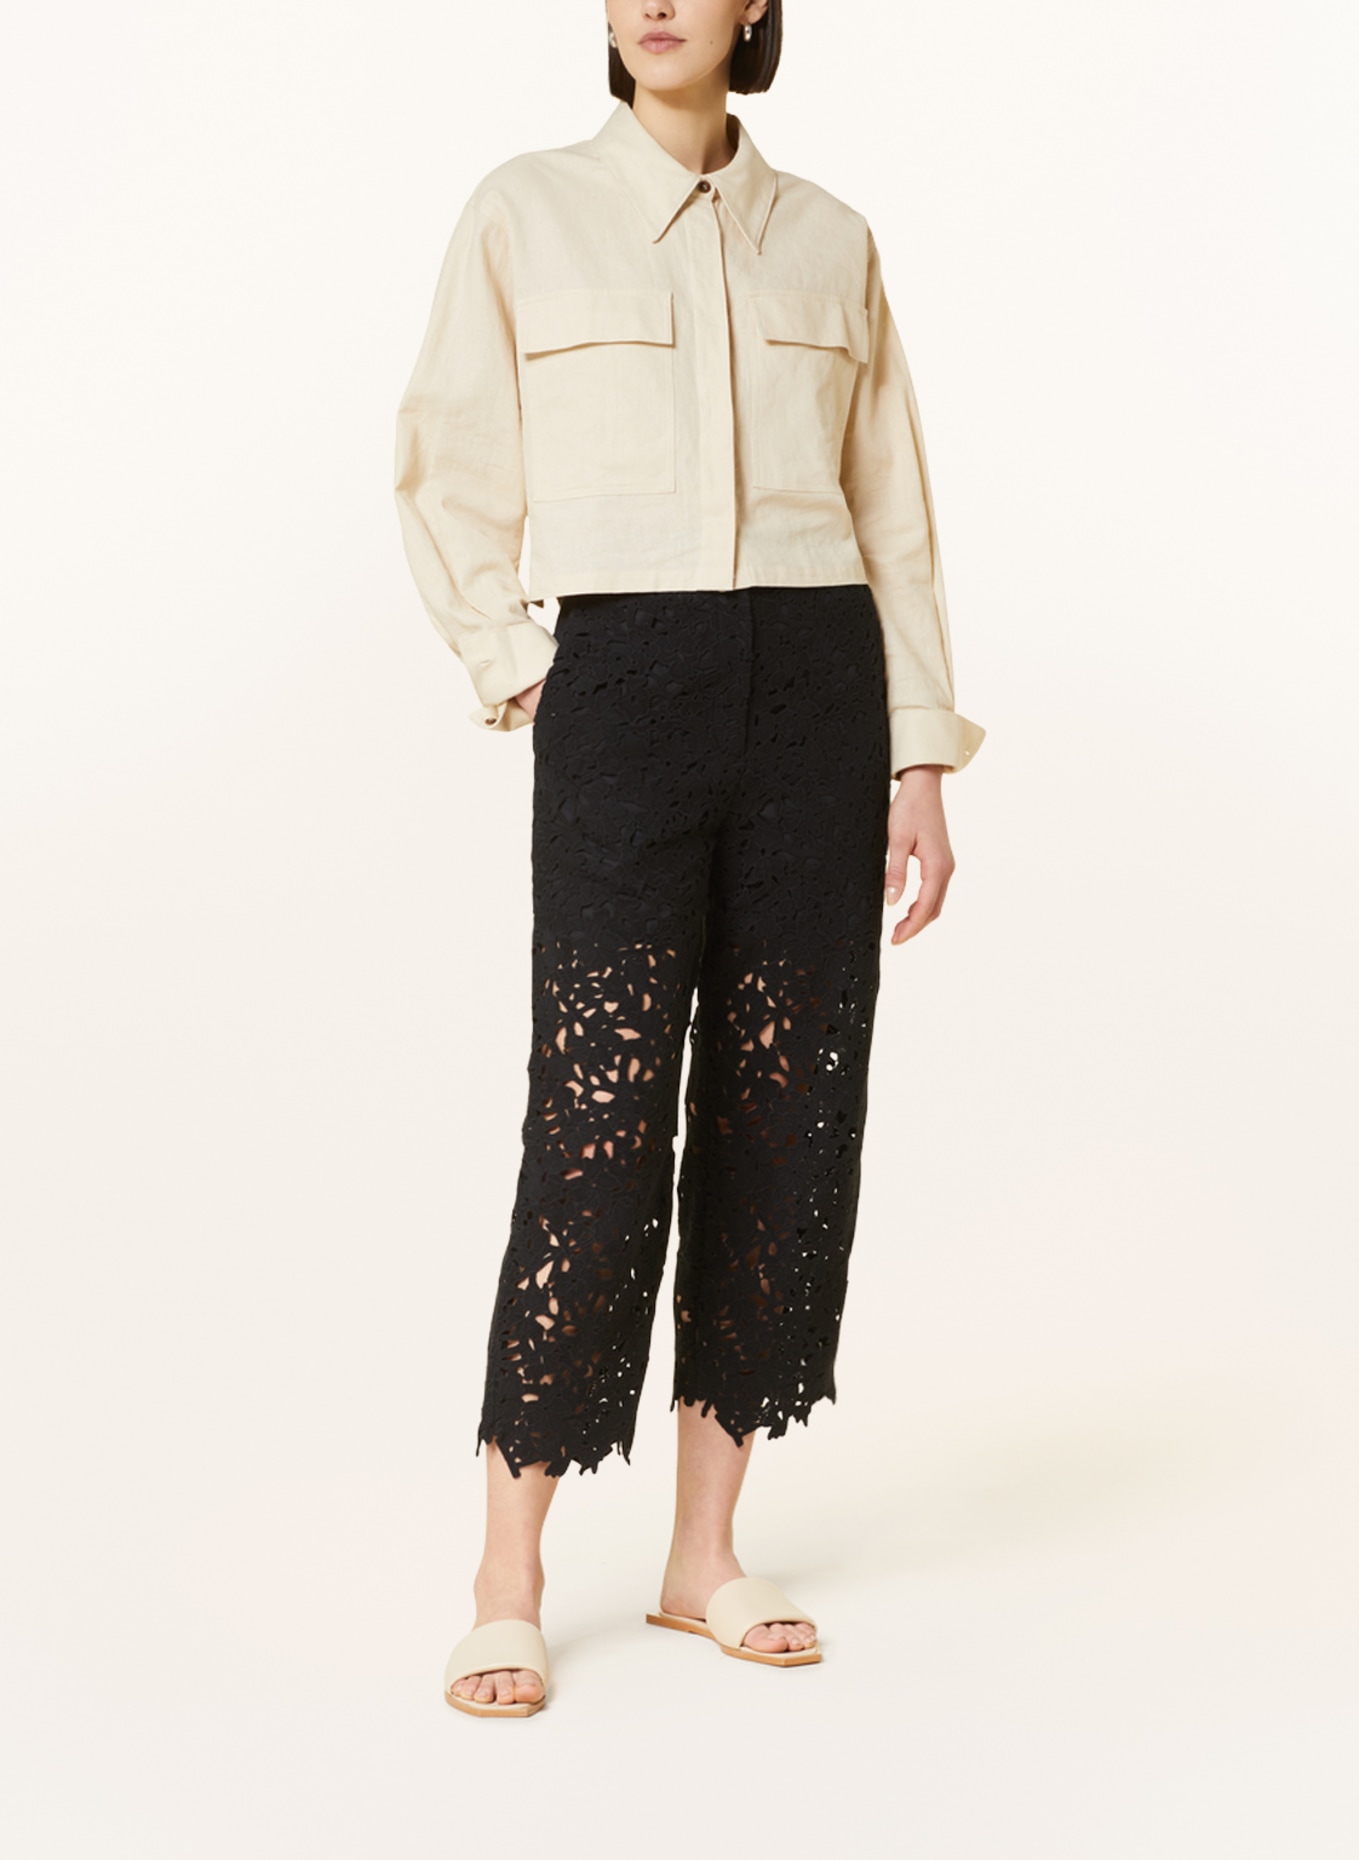 COS 7/8 trousers made of crochet lace, Color: BLACK (Image 2)